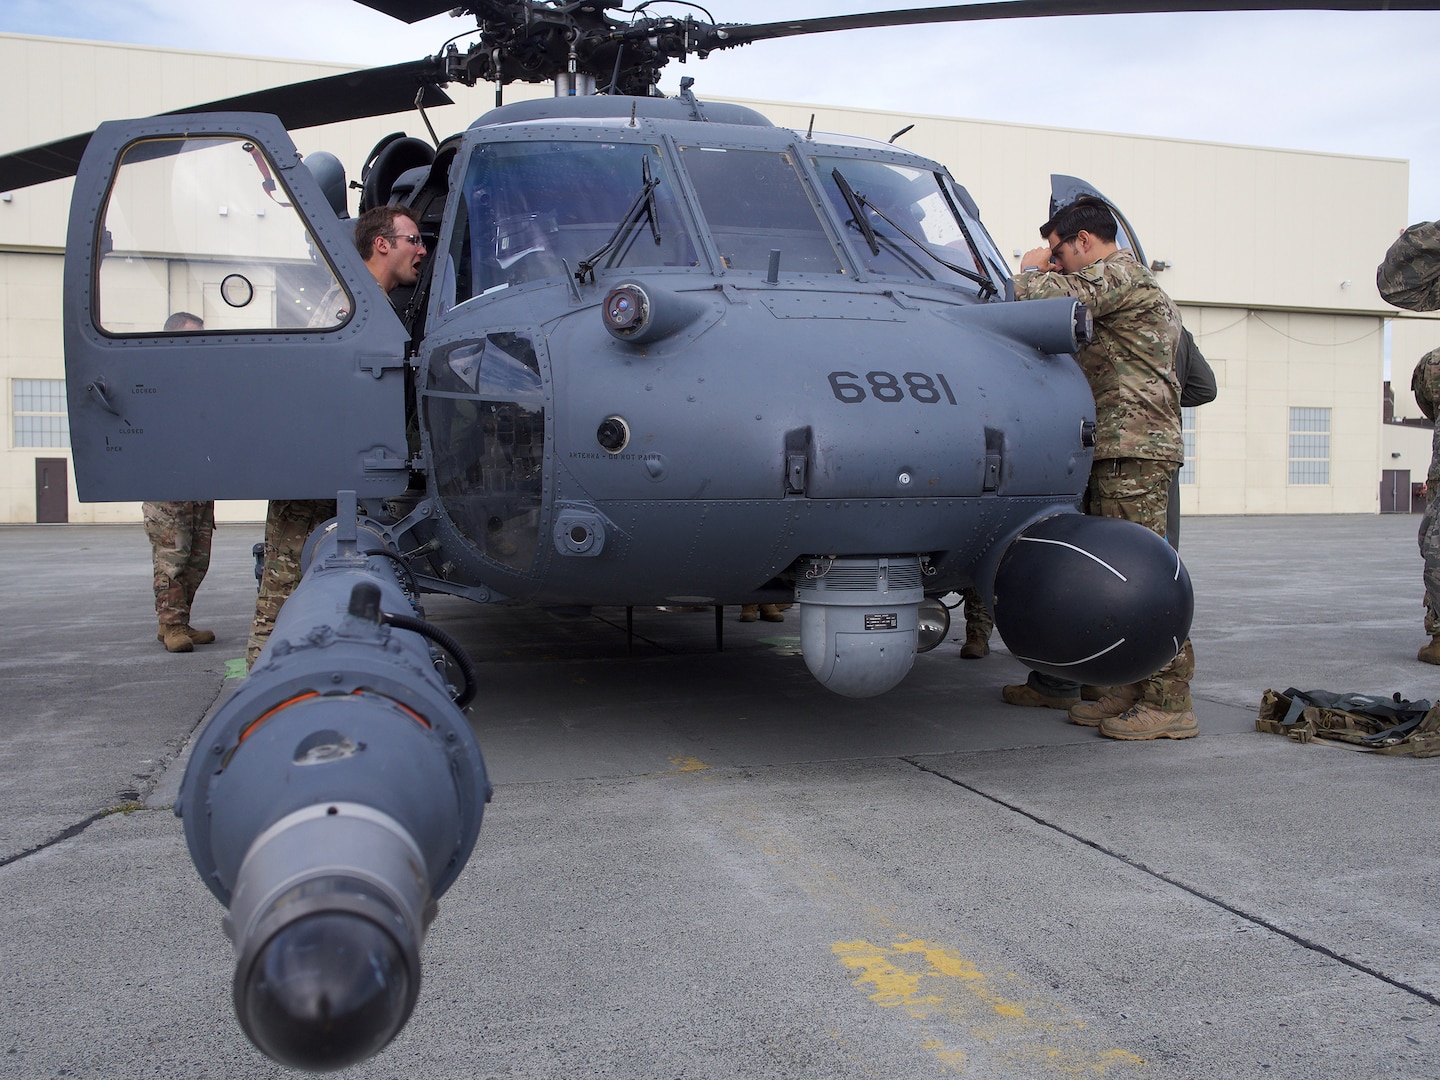 210th Rescue Squadron Receives First Operational Loss Replacement Pave Hawk